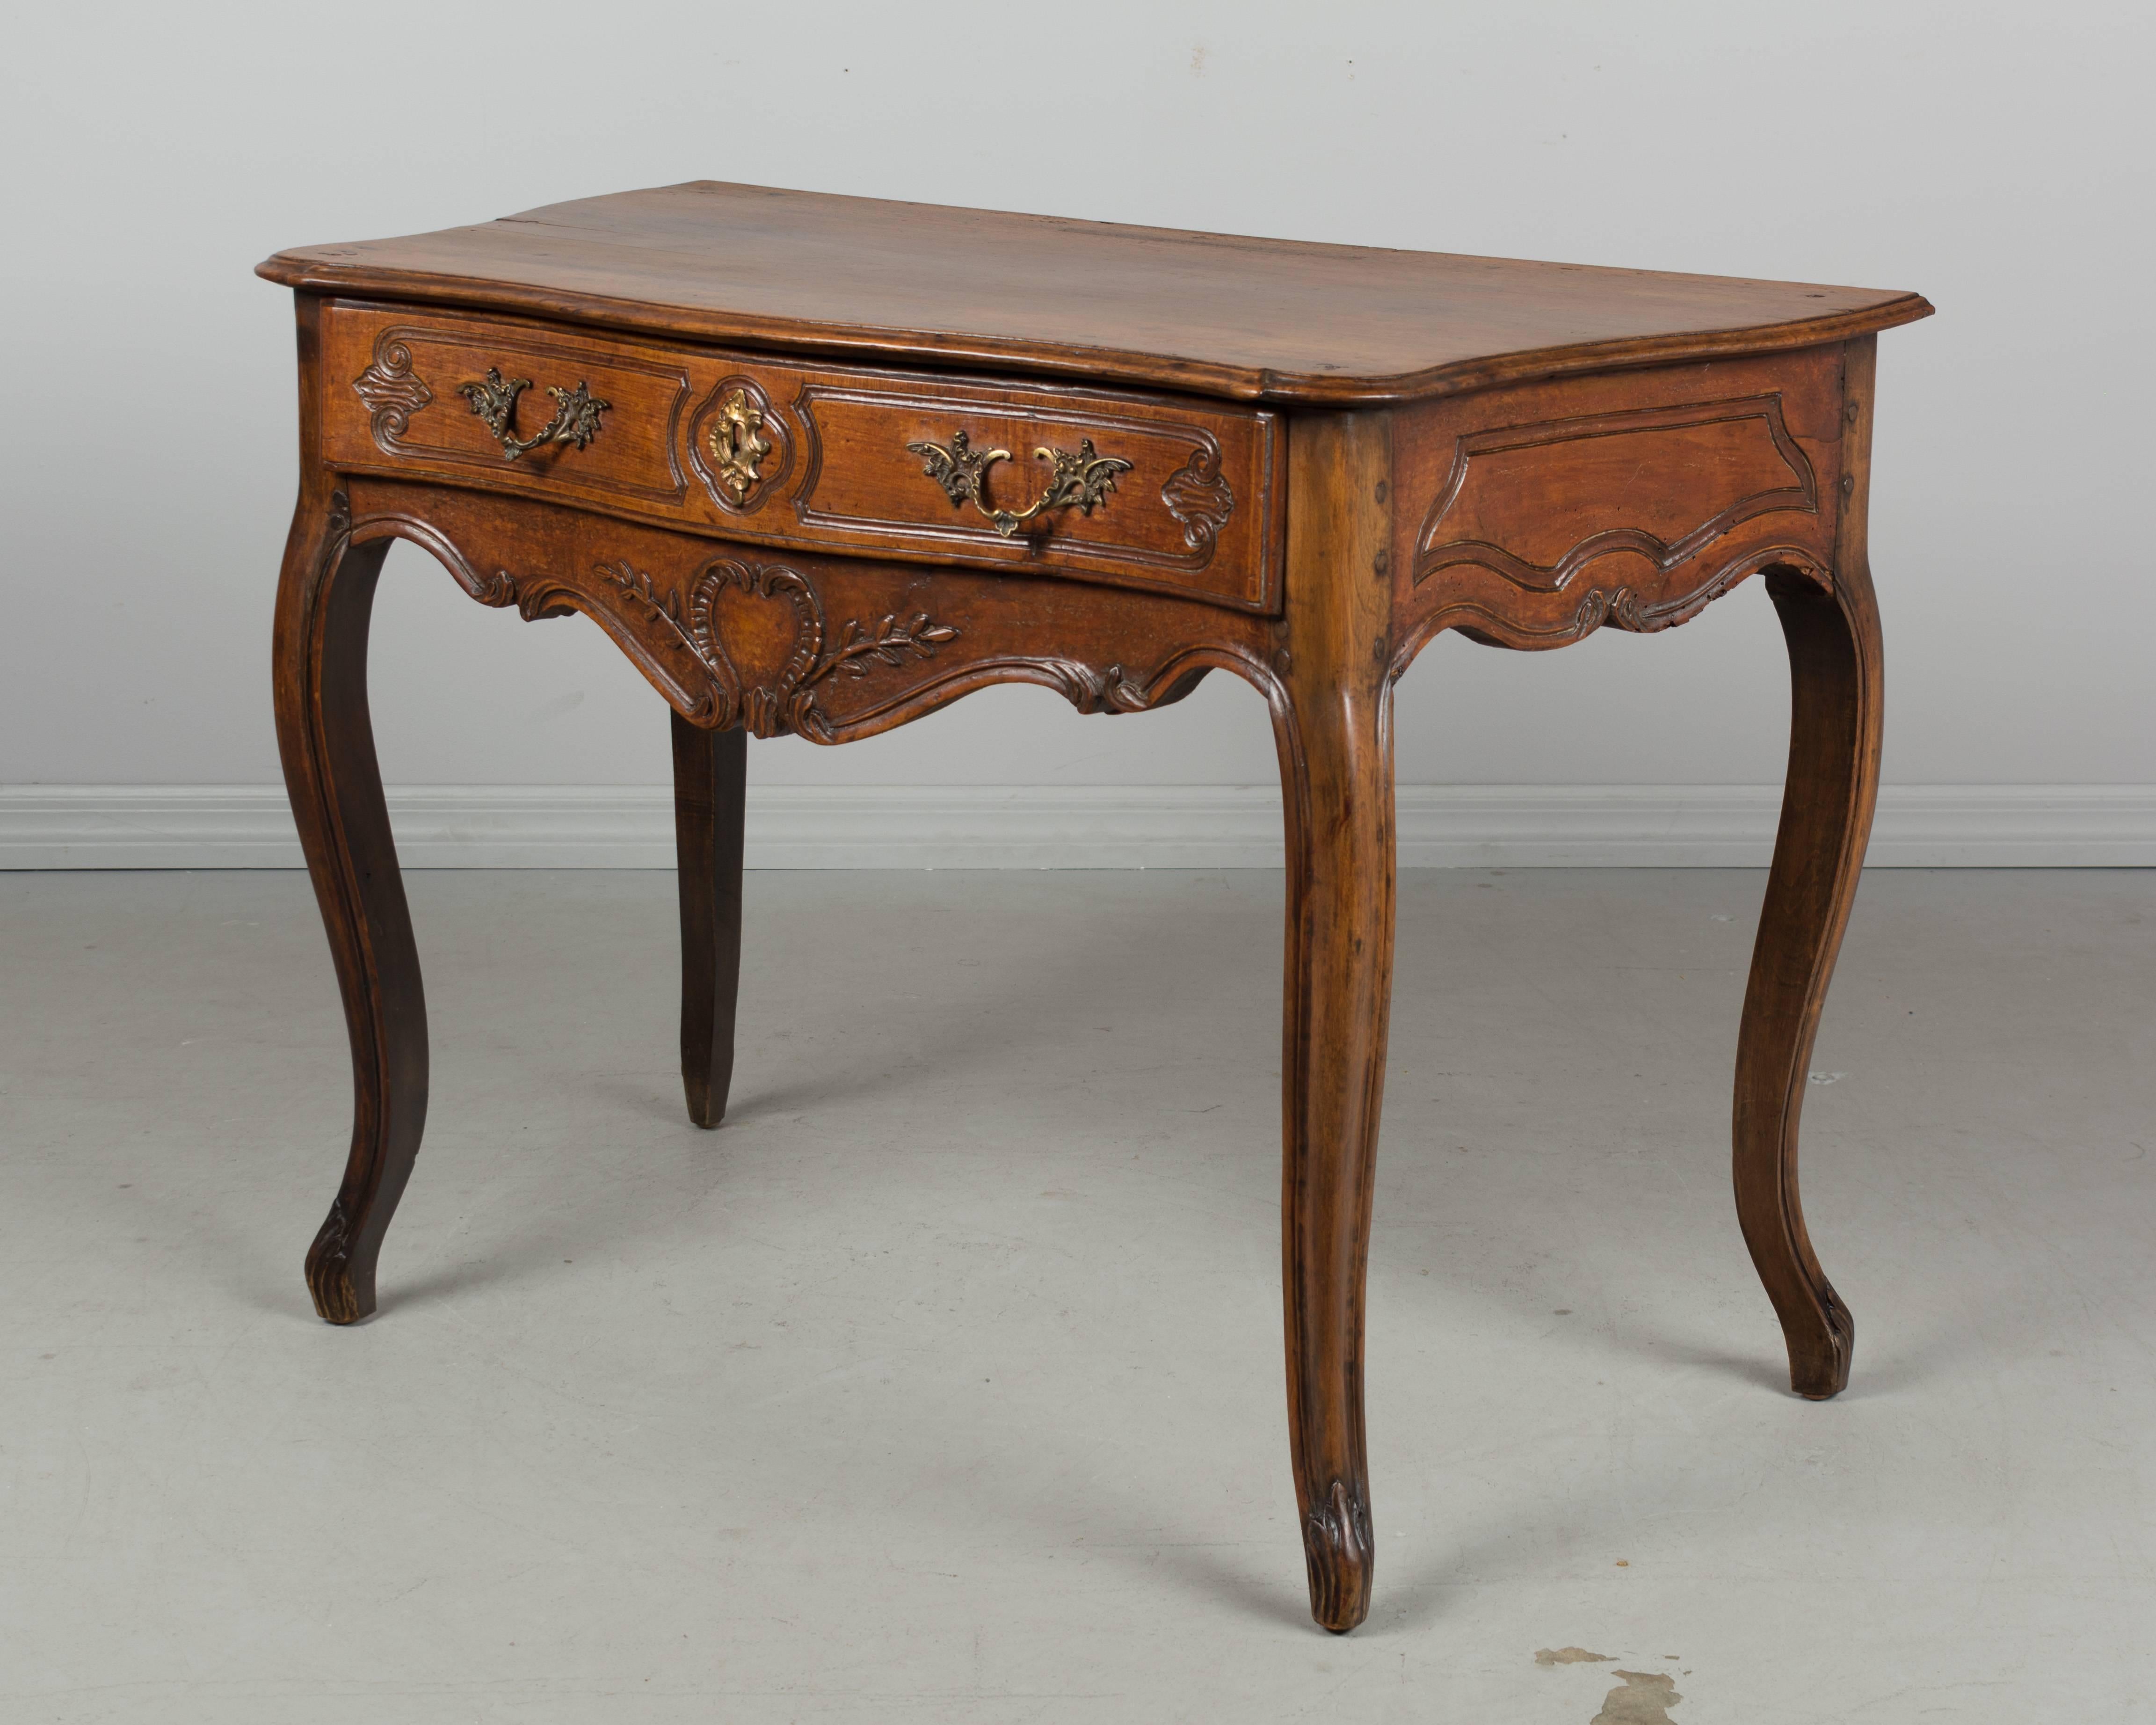 A 19th century Louis XV style French Provençal console table with serpentine front, curved sides and a single dovetailed drawer. Made of solid walnut with nice hand-carved details. The bronze hardware is as found. Nice proportions, sturdy and well